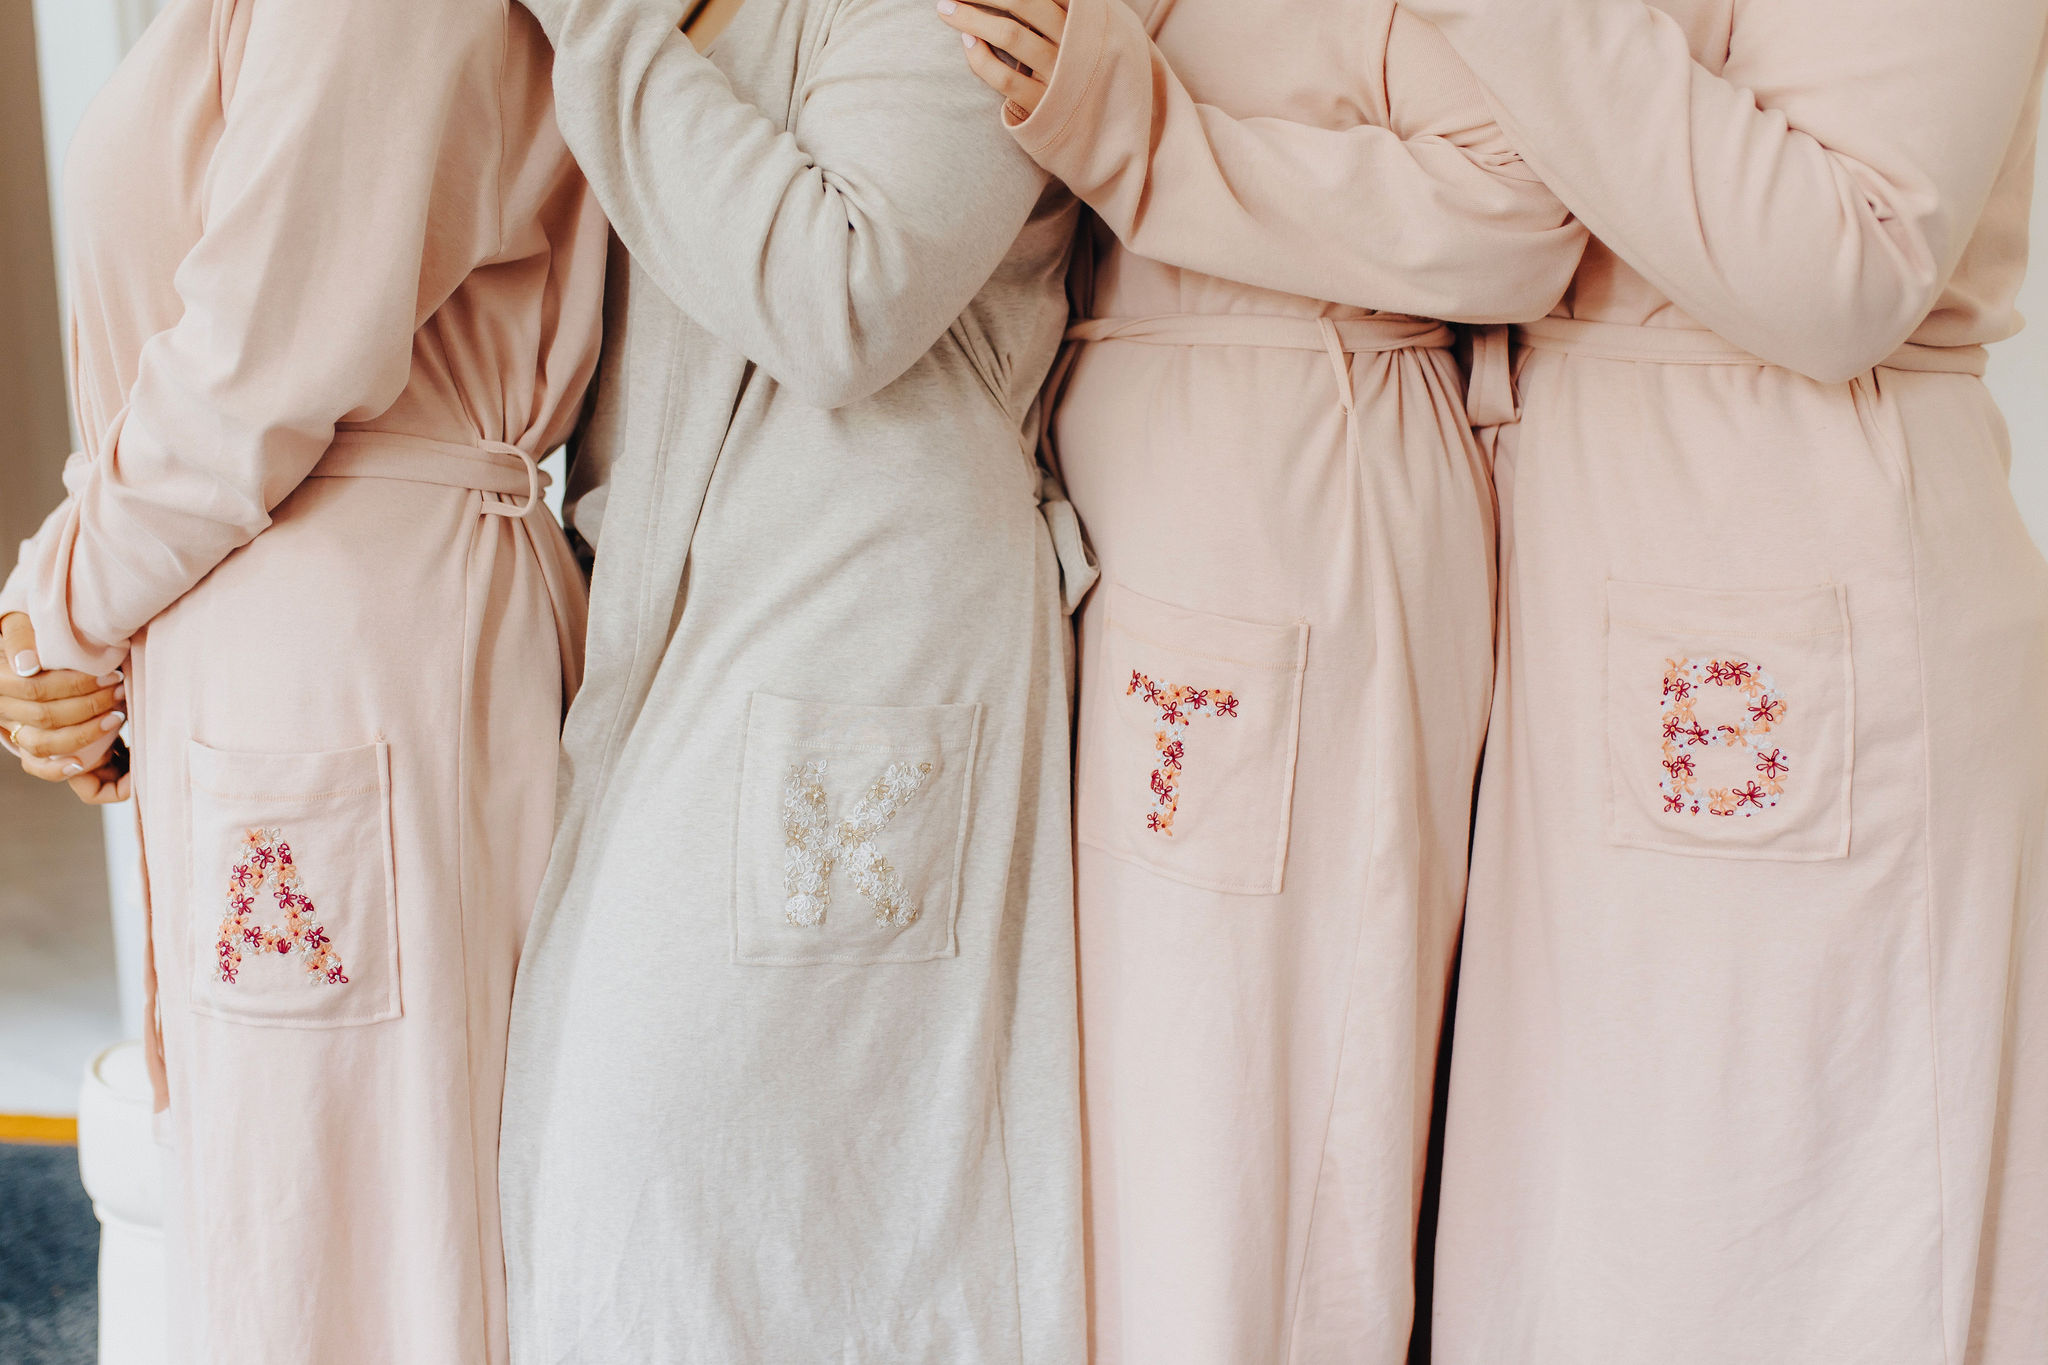 matching robes with initials on them